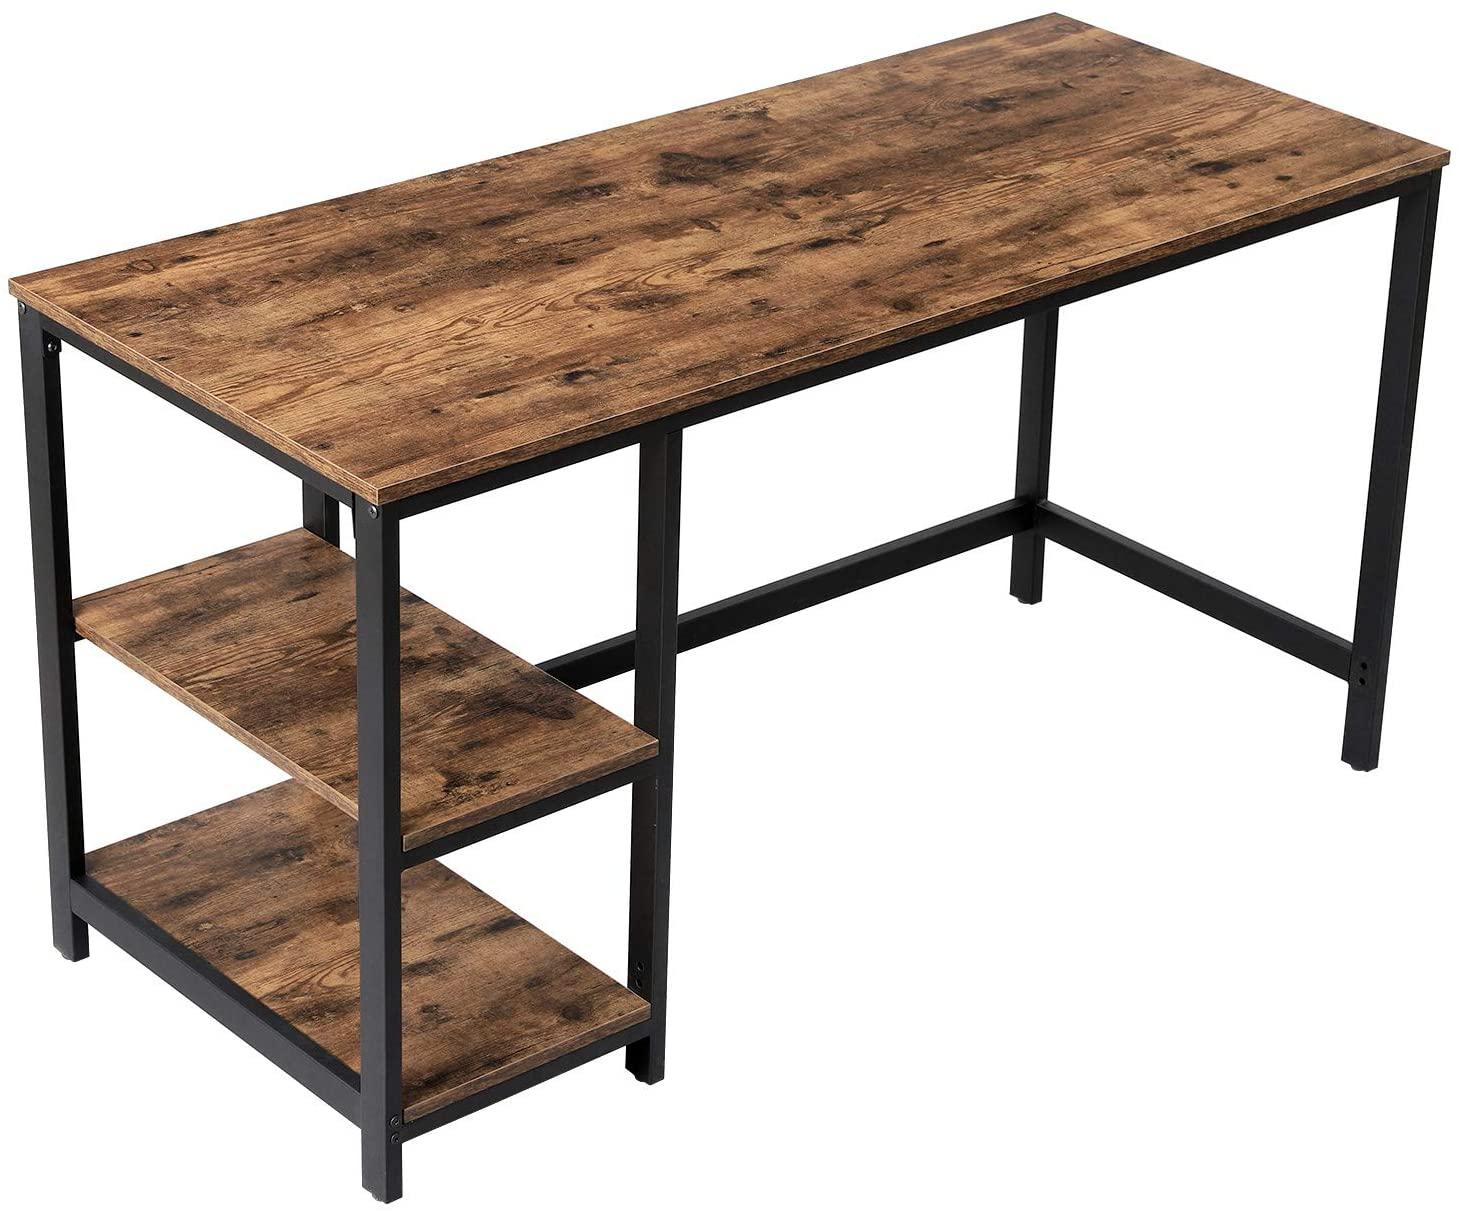 55in Vasagle Computer Desk for $95.99 Shipped